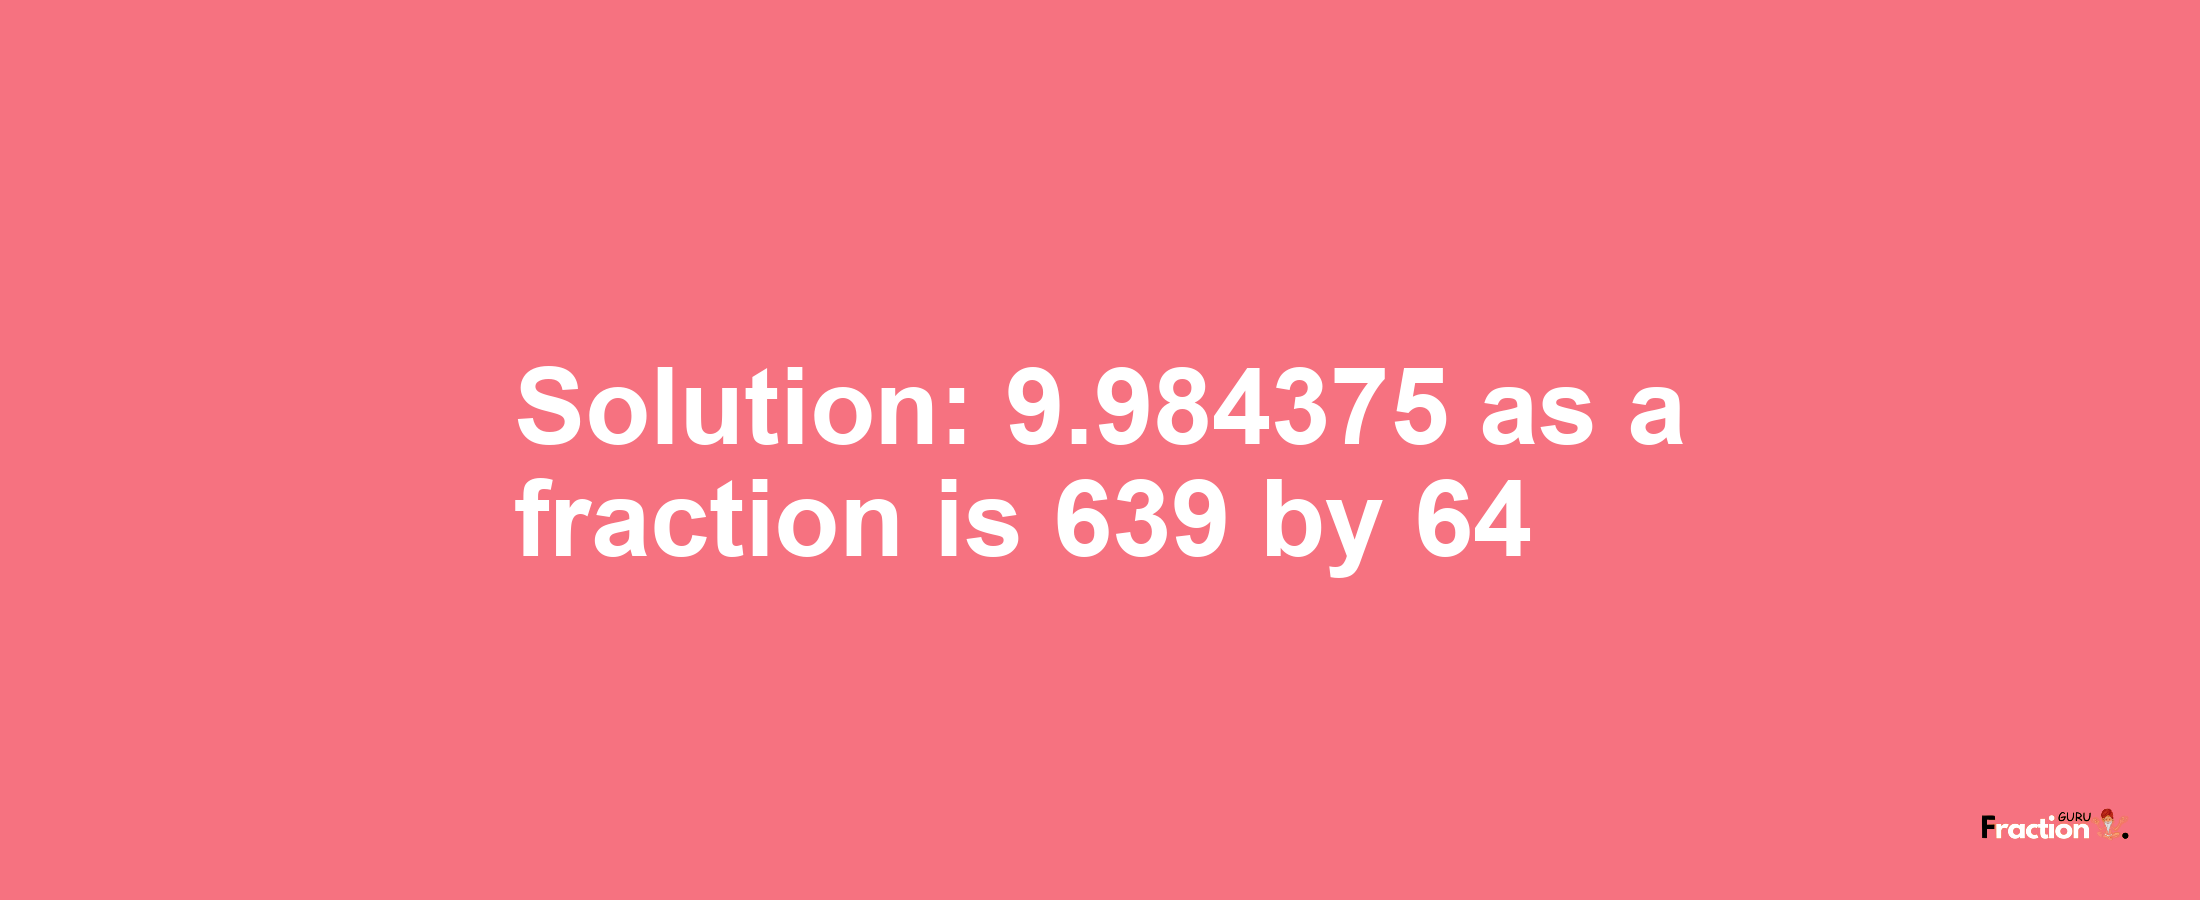 Solution:9.984375 as a fraction is 639/64